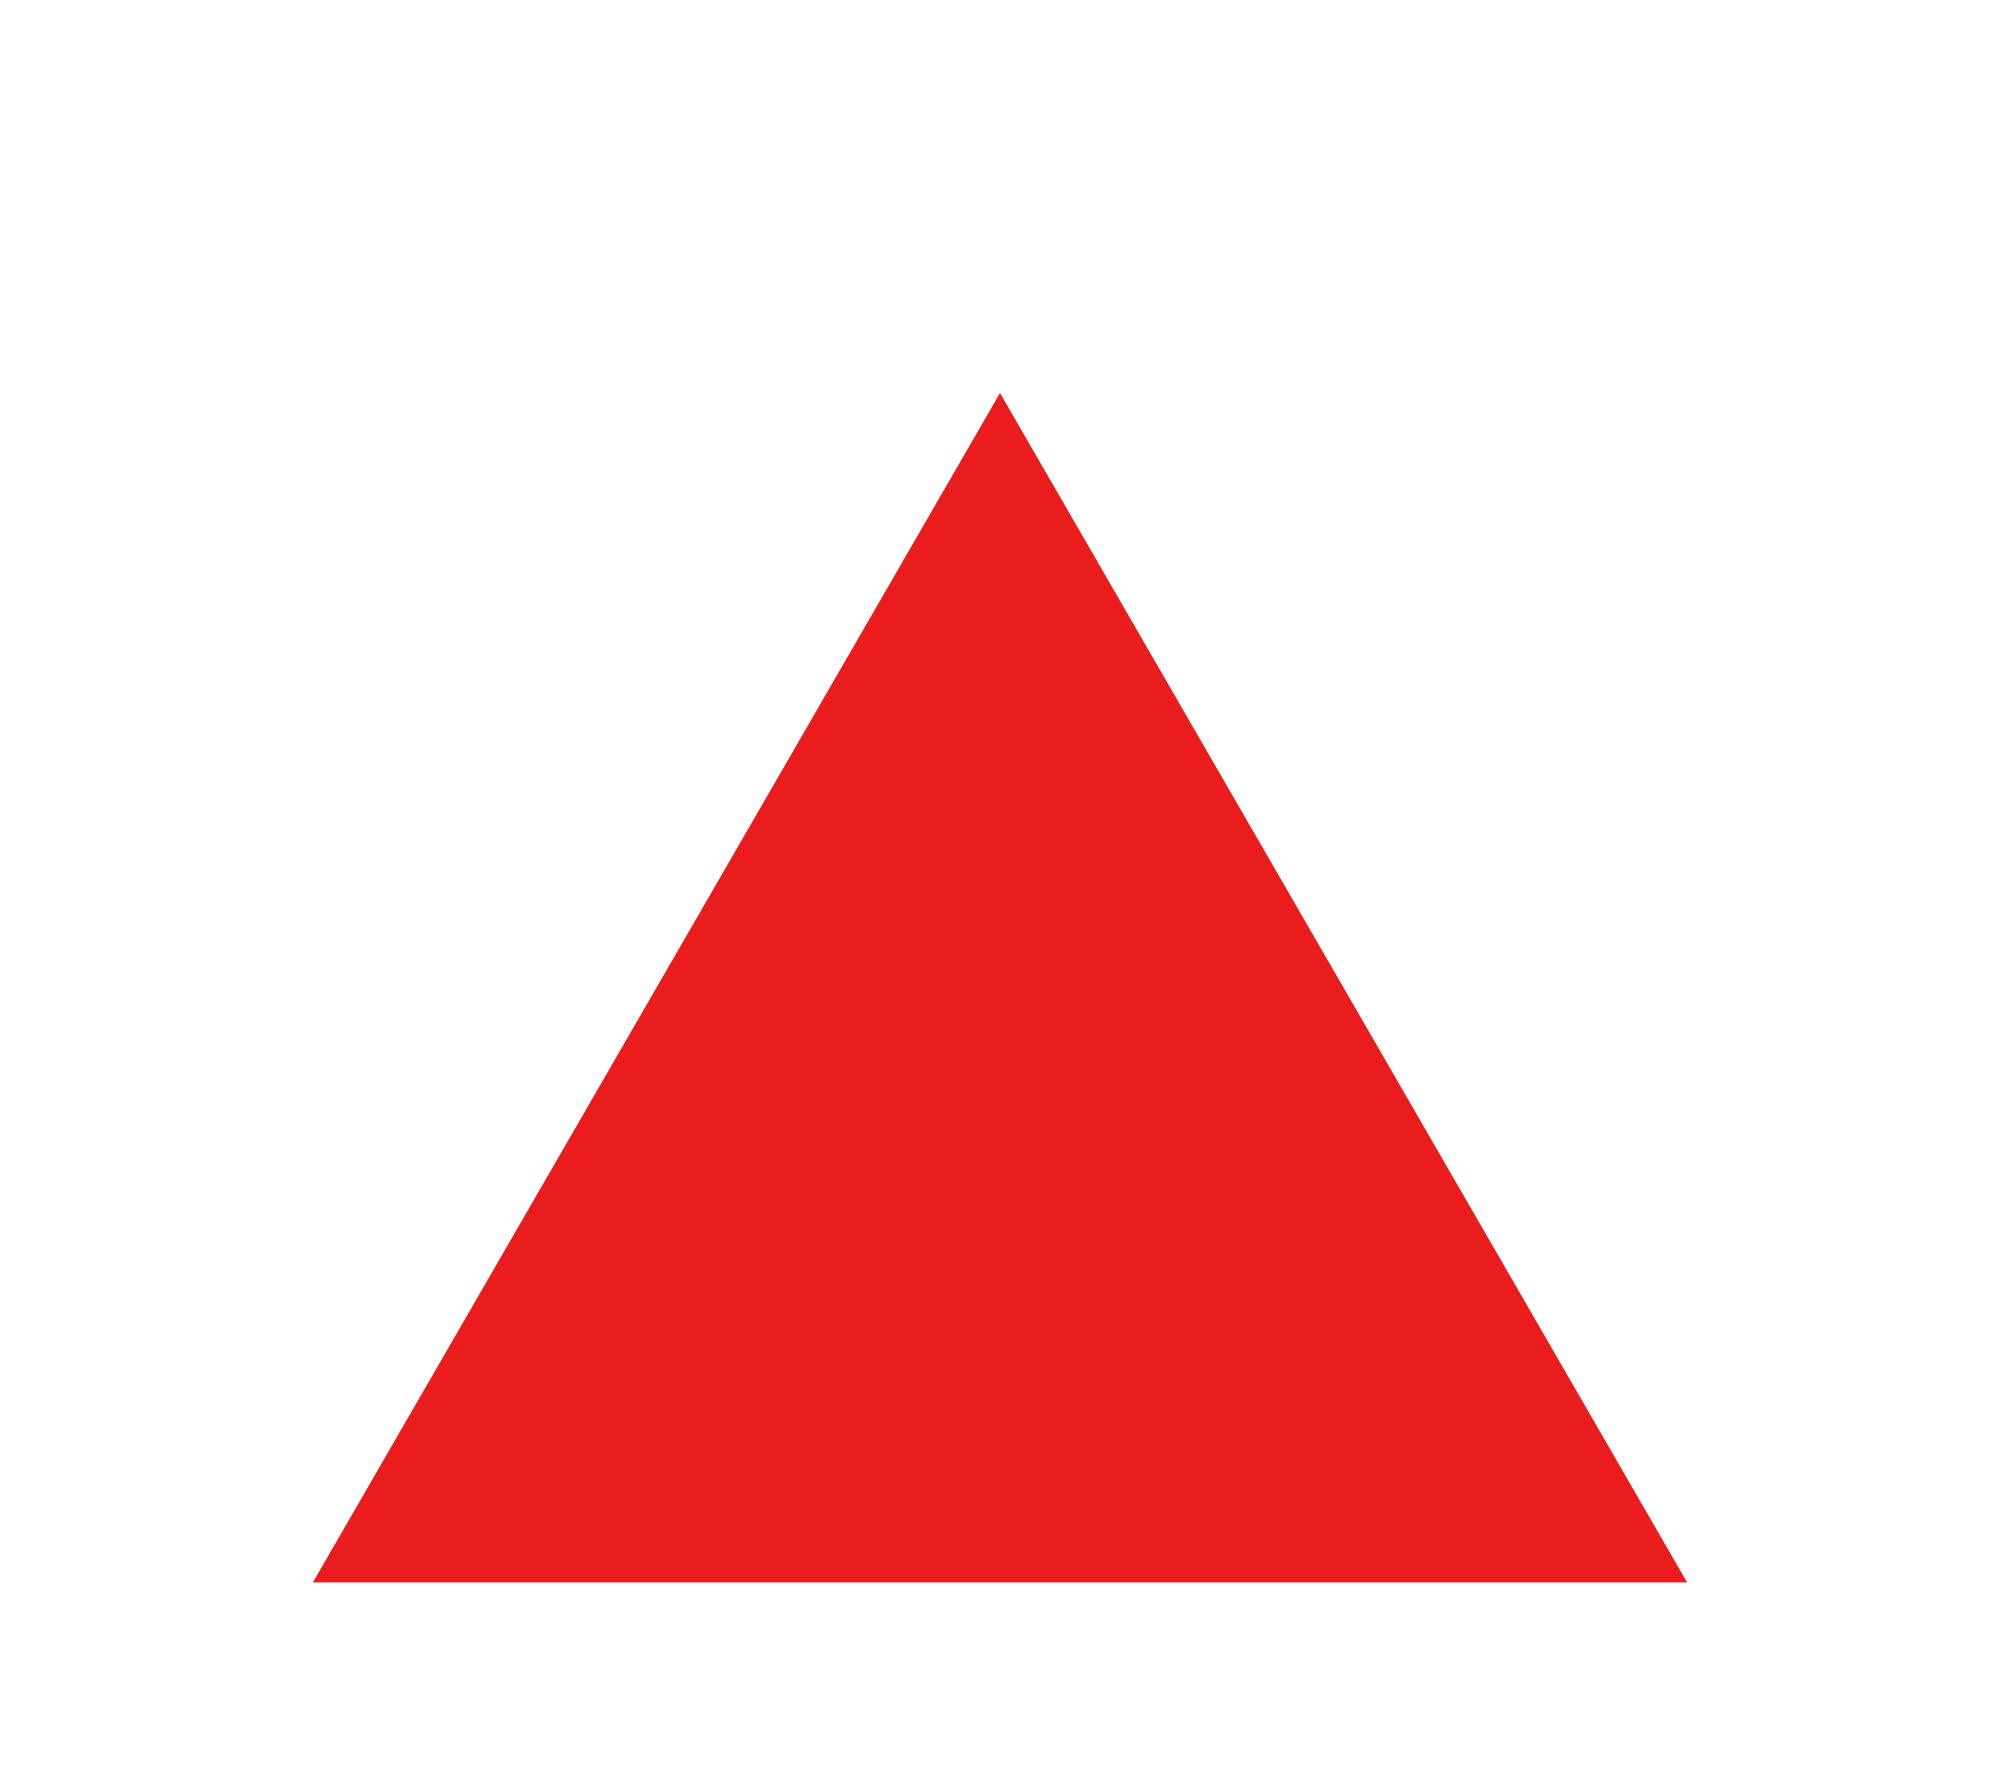 Red Triangle White Line Logo - File:Red triangle with thick white border.svg - Wikimedia Commons